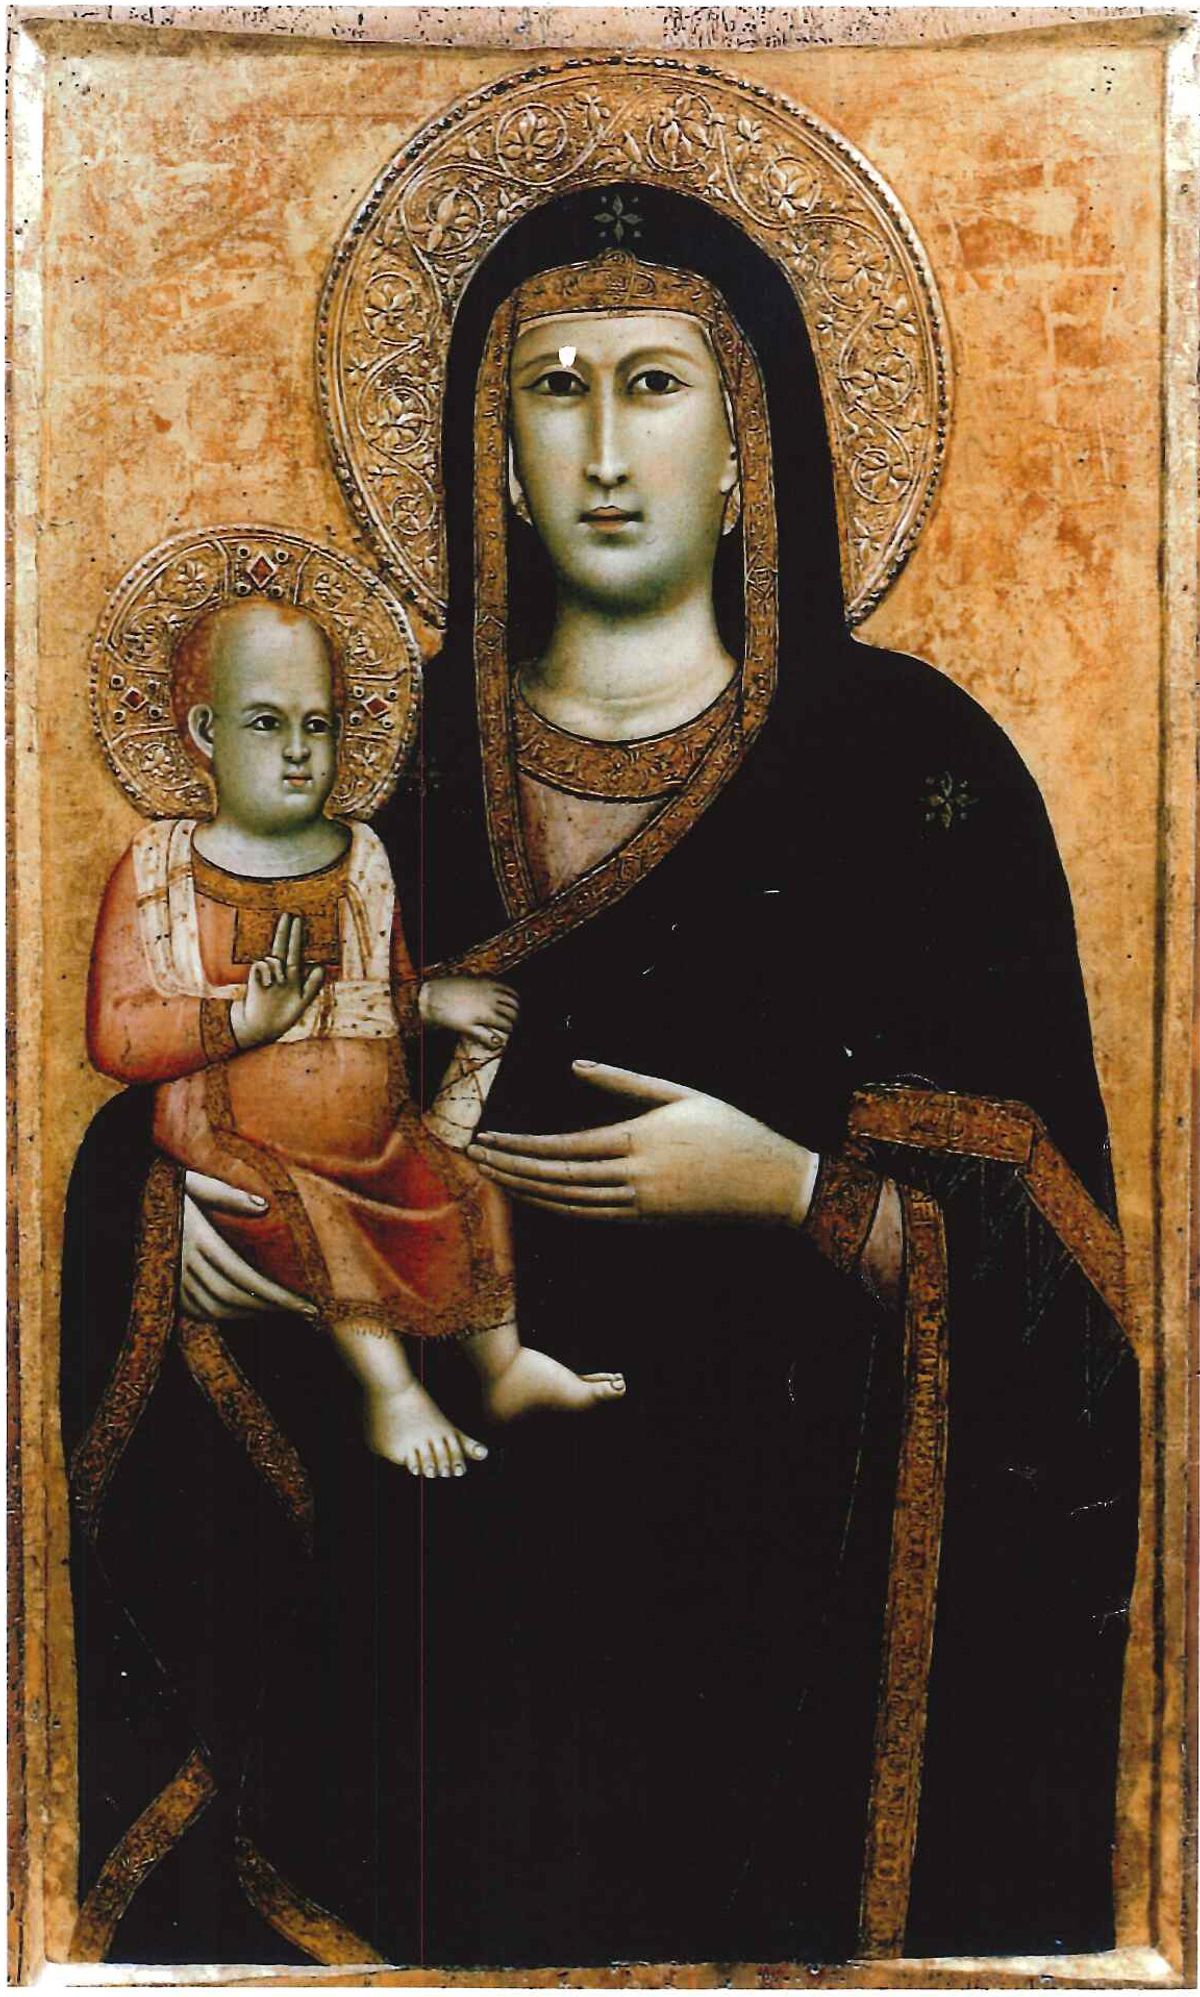 The 14th century painting of the Madonna with Child has been in the UK since 2007 